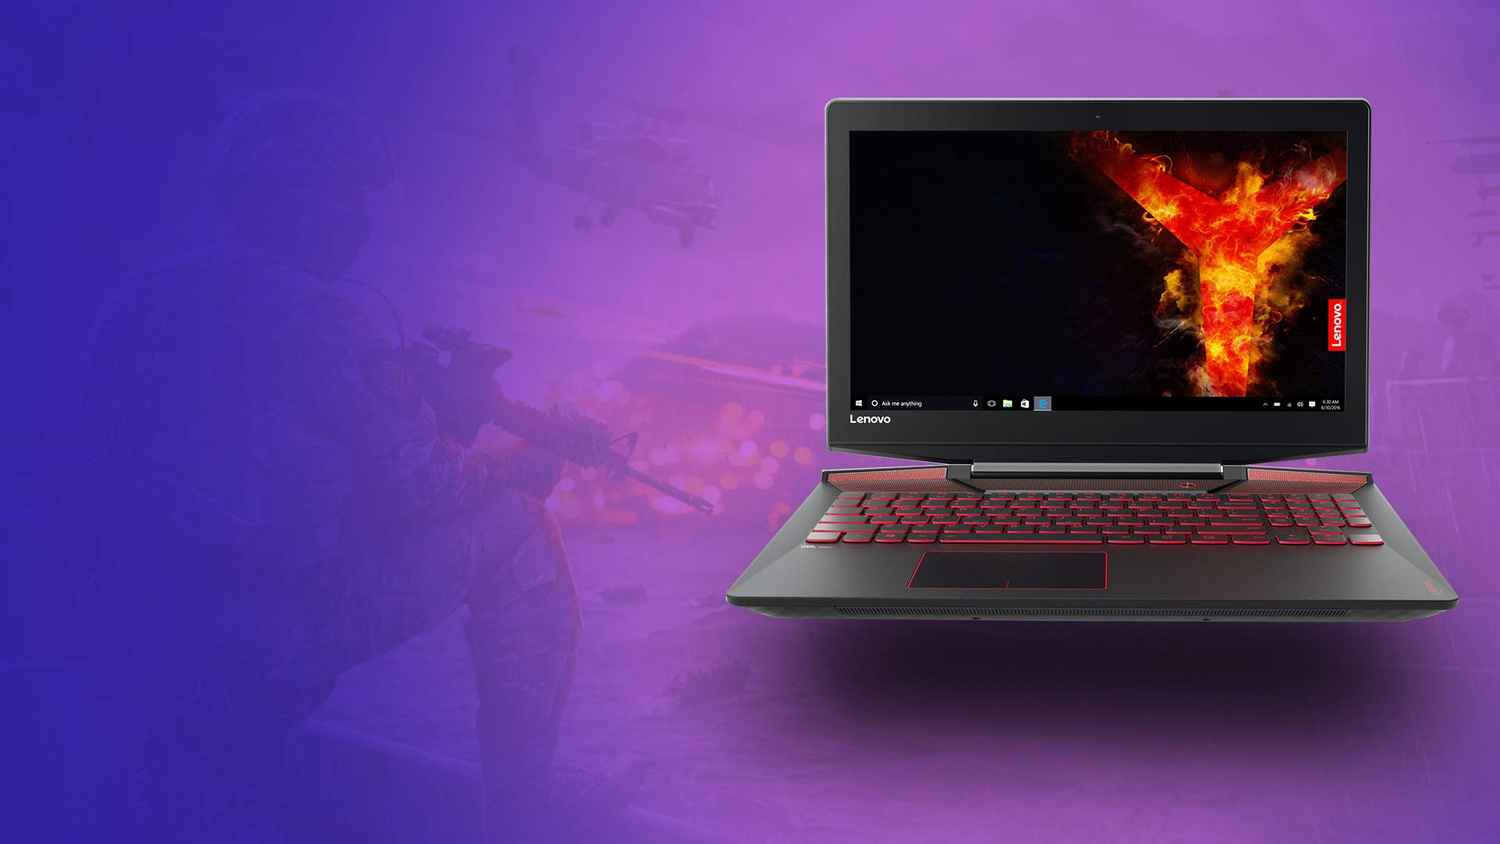 How to aim for the right gaming laptop